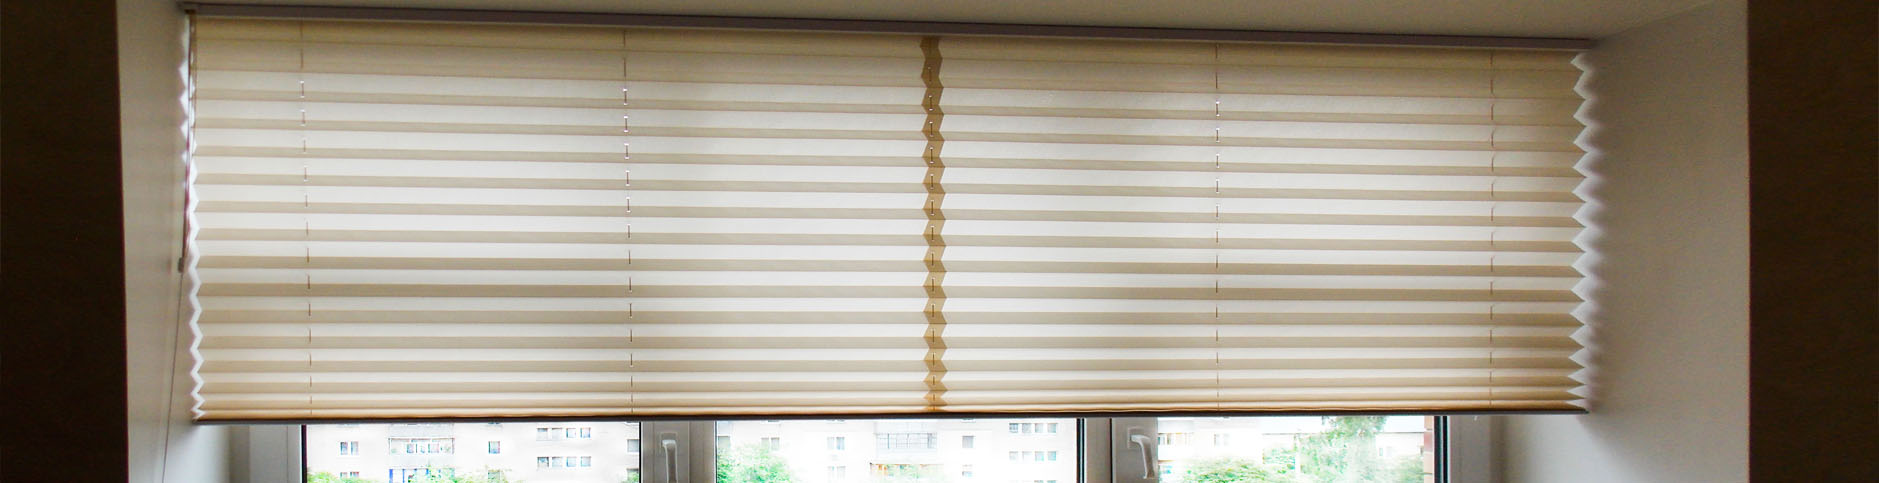 Modern and Practical Cellular Shades in Boston, MA